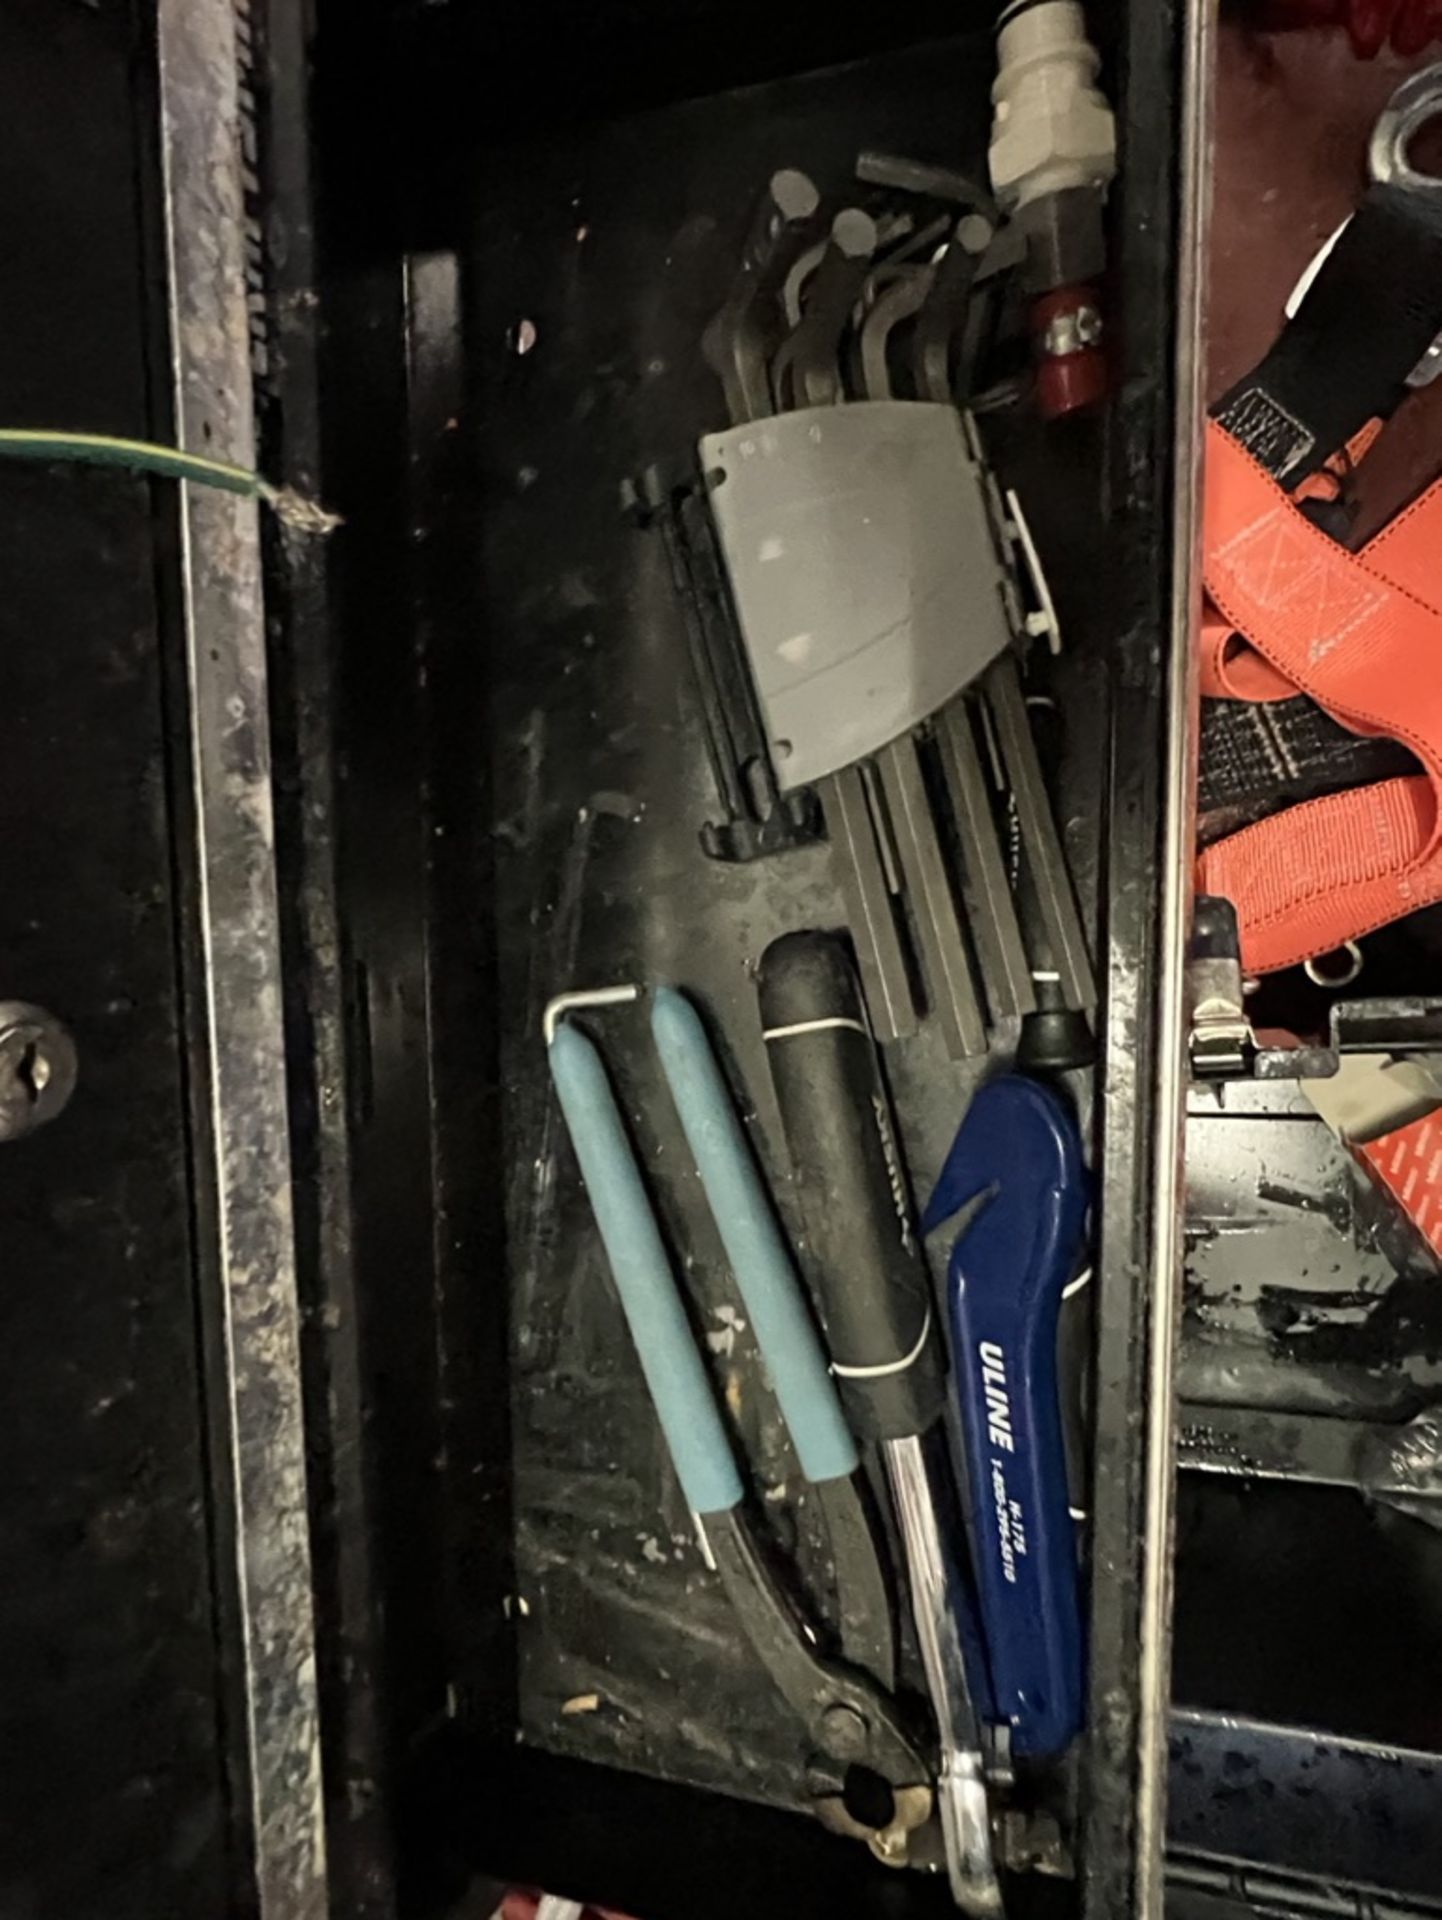 LOT OF: (2) PLASTIC TOOL BOXES, (1) METAL CRAFTSMAN TOOL BOX AND PICTURED SMALL TOOLS, DRILL BITS, - Image 13 of 15